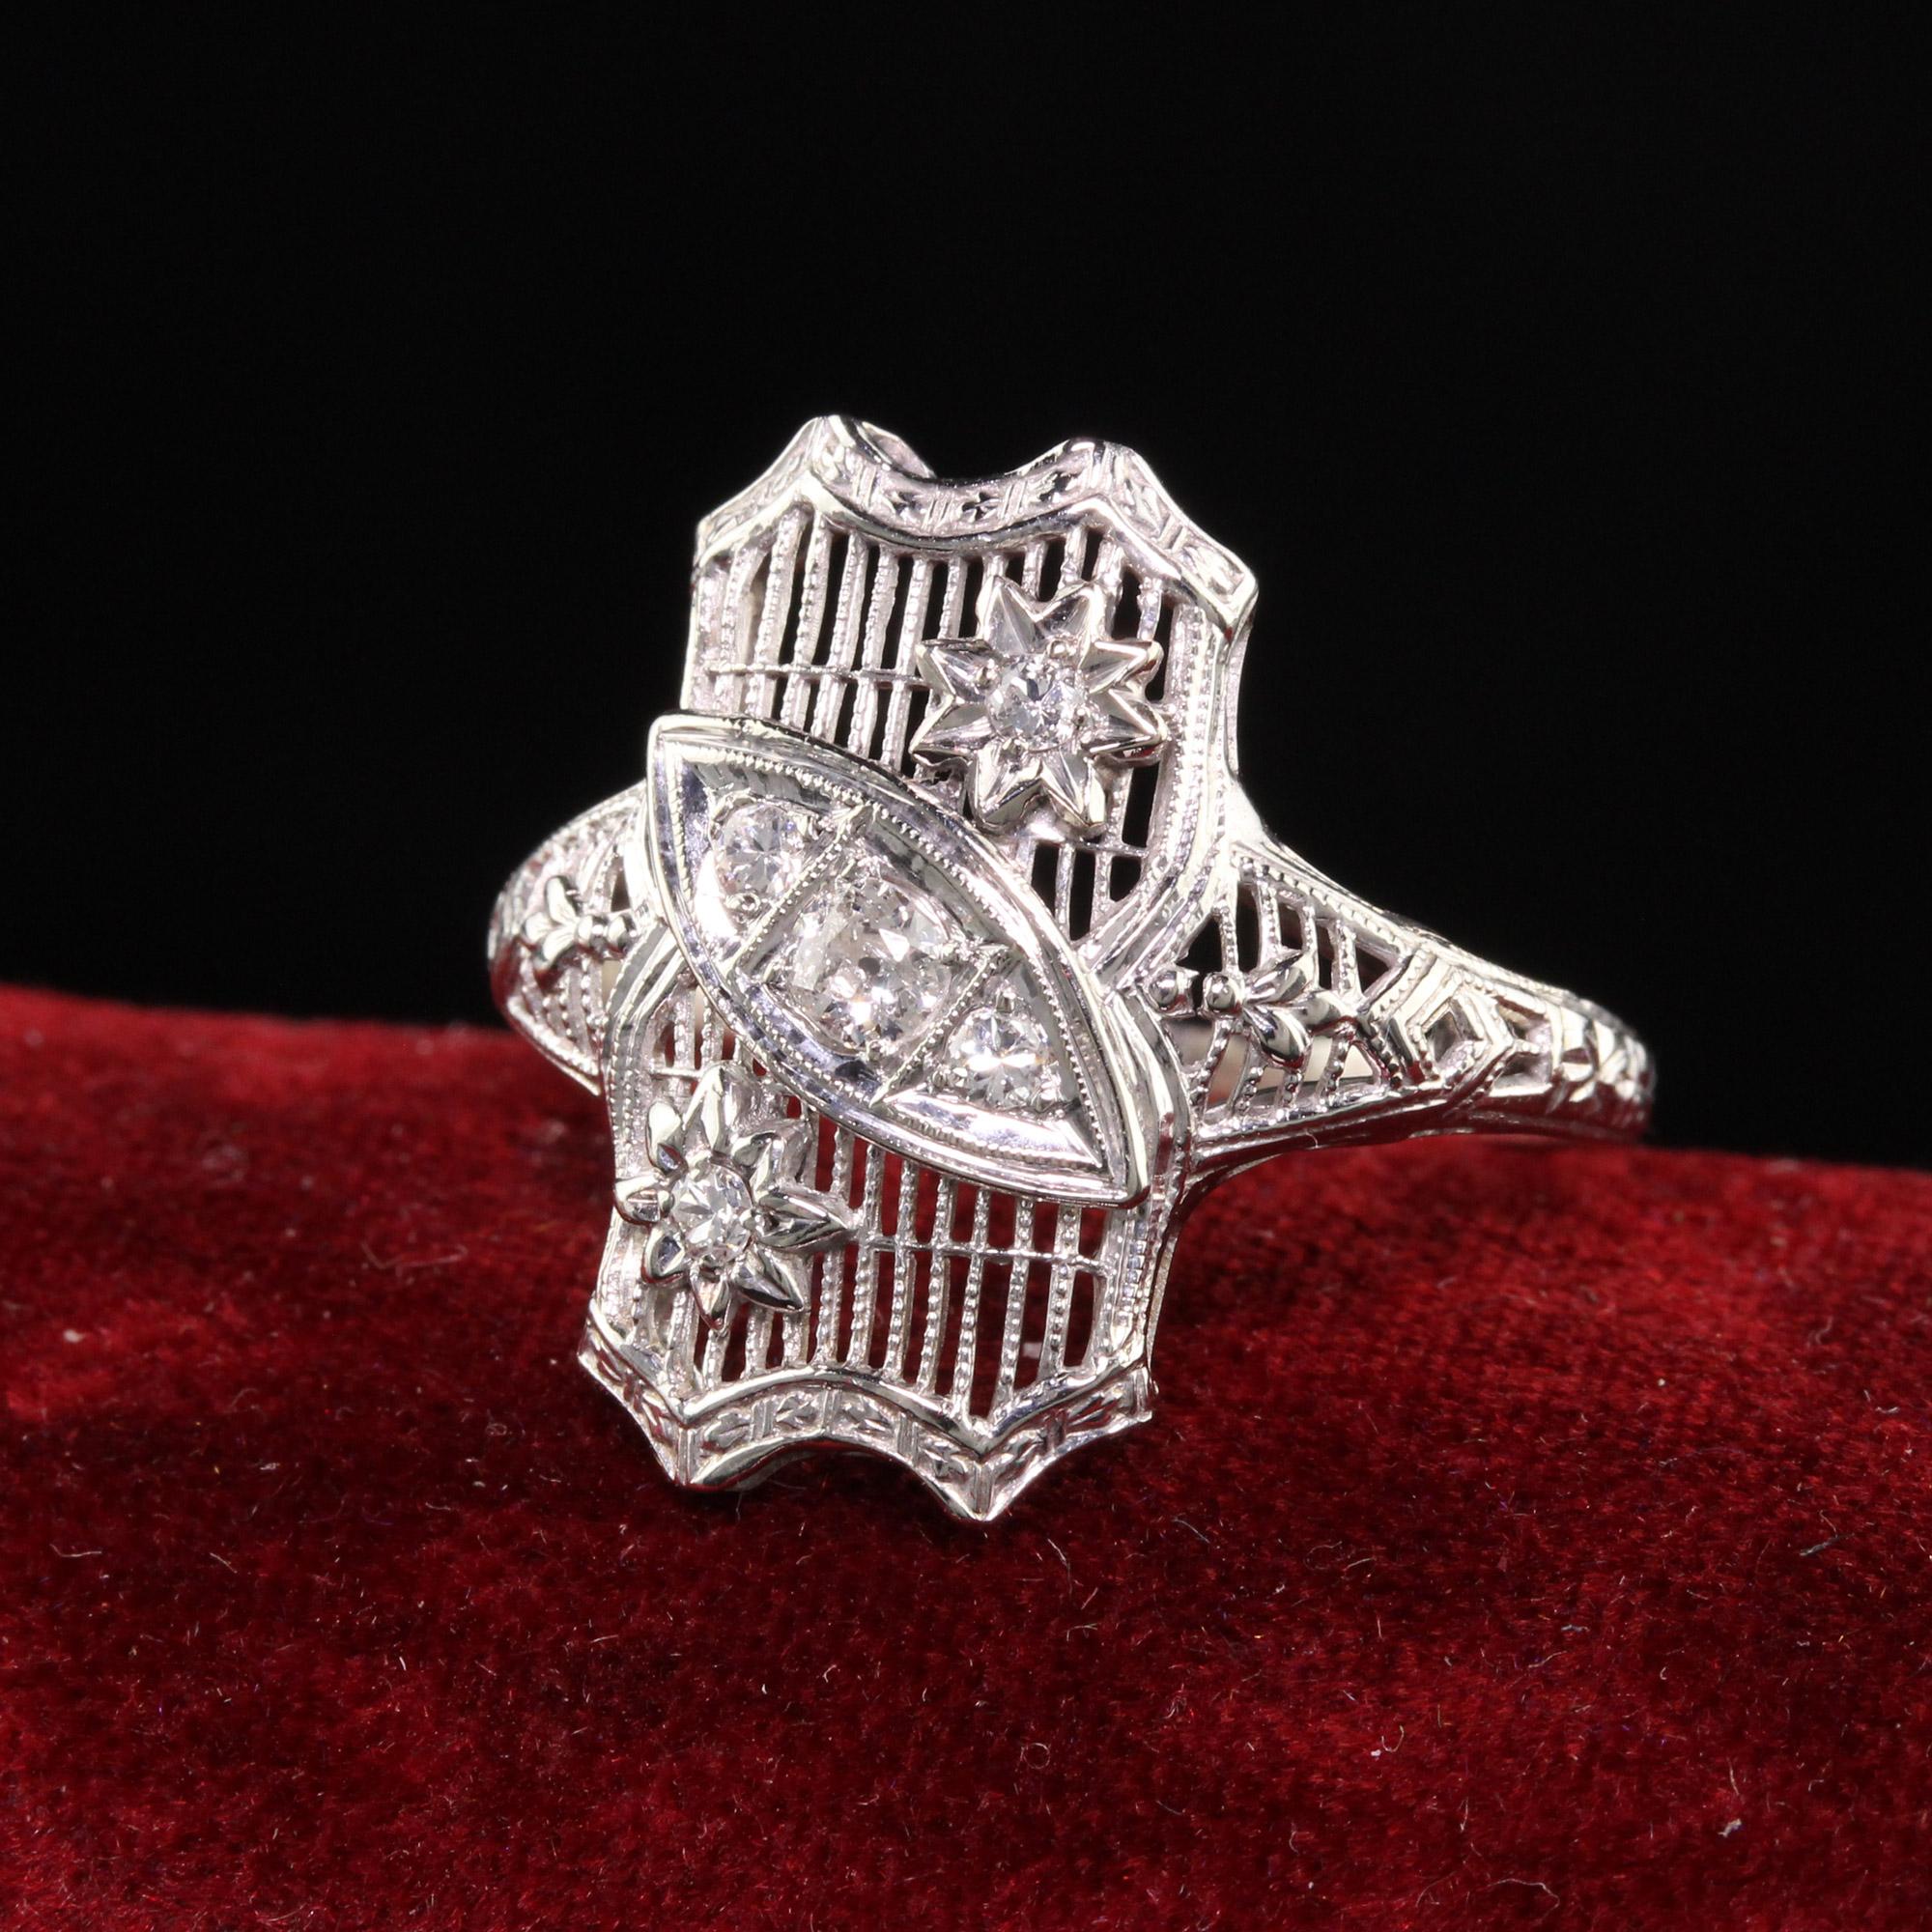 Beautiful Antique Art Deco 18K White Gold Old European Diamond Filigree Ring. This gorgeous ring is in pristine condition and has beautiful filigree work on the top of the ring. It has old european cut diamonds set in an interesting pattern.

Item